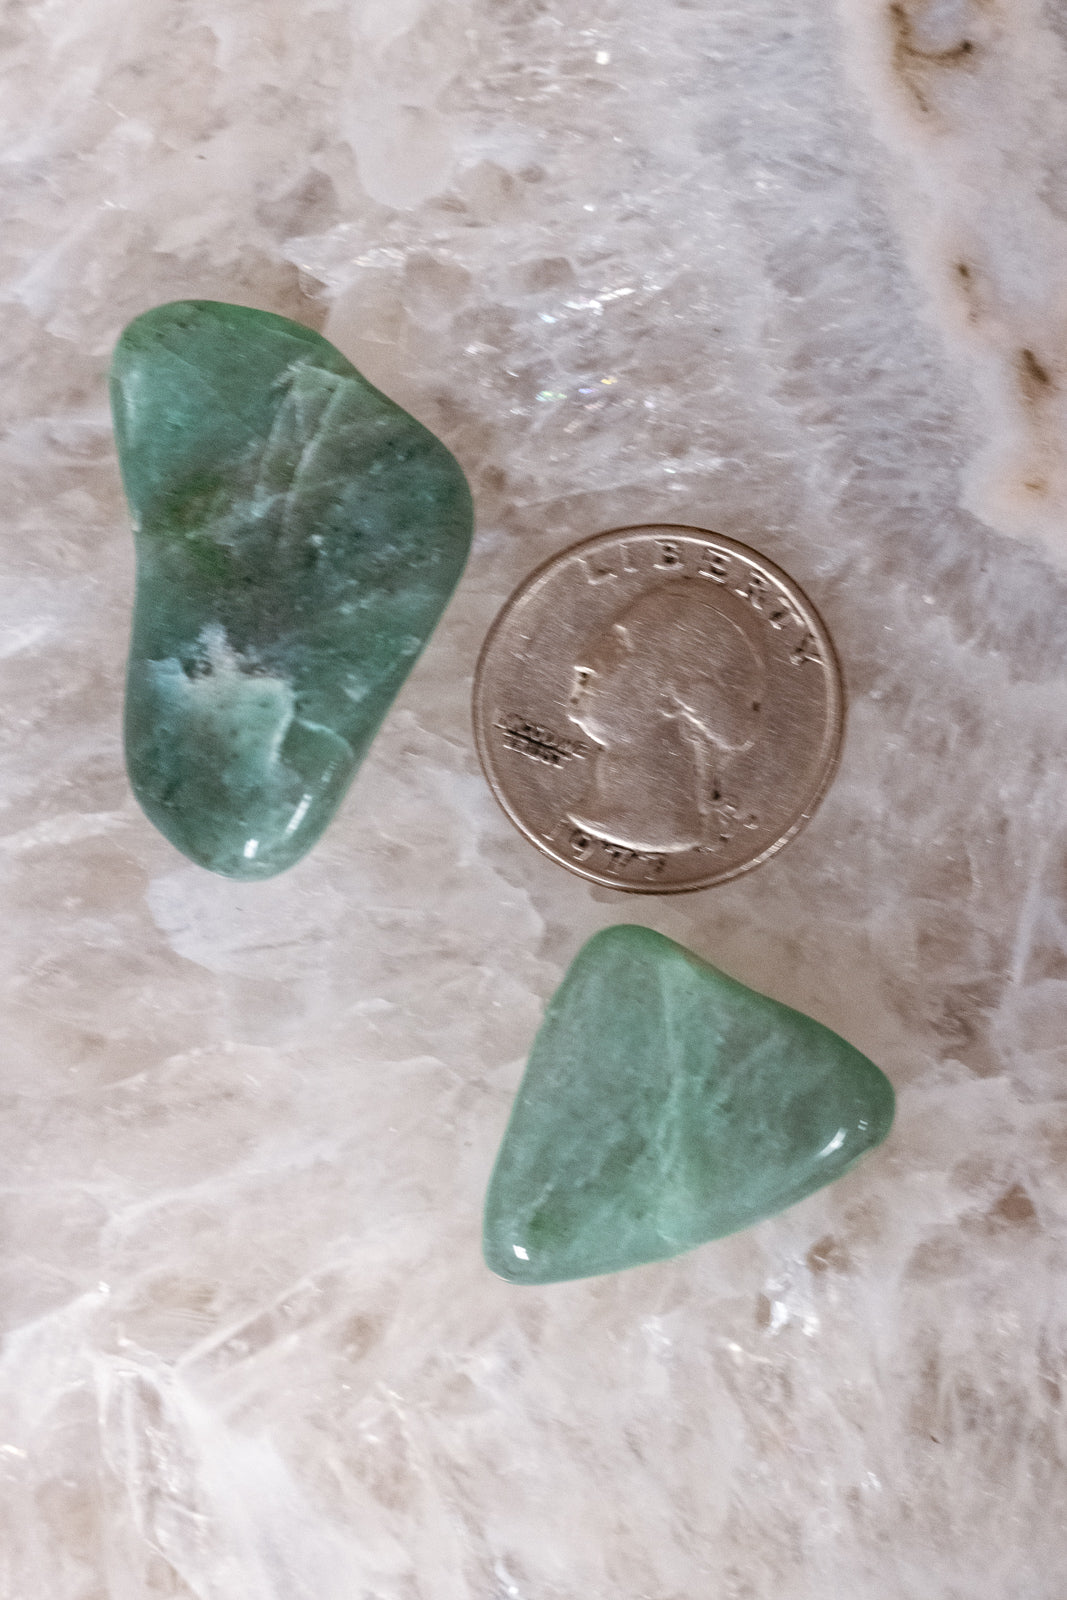 Load image into Gallery viewer, Aventurine Tumbled Stone
